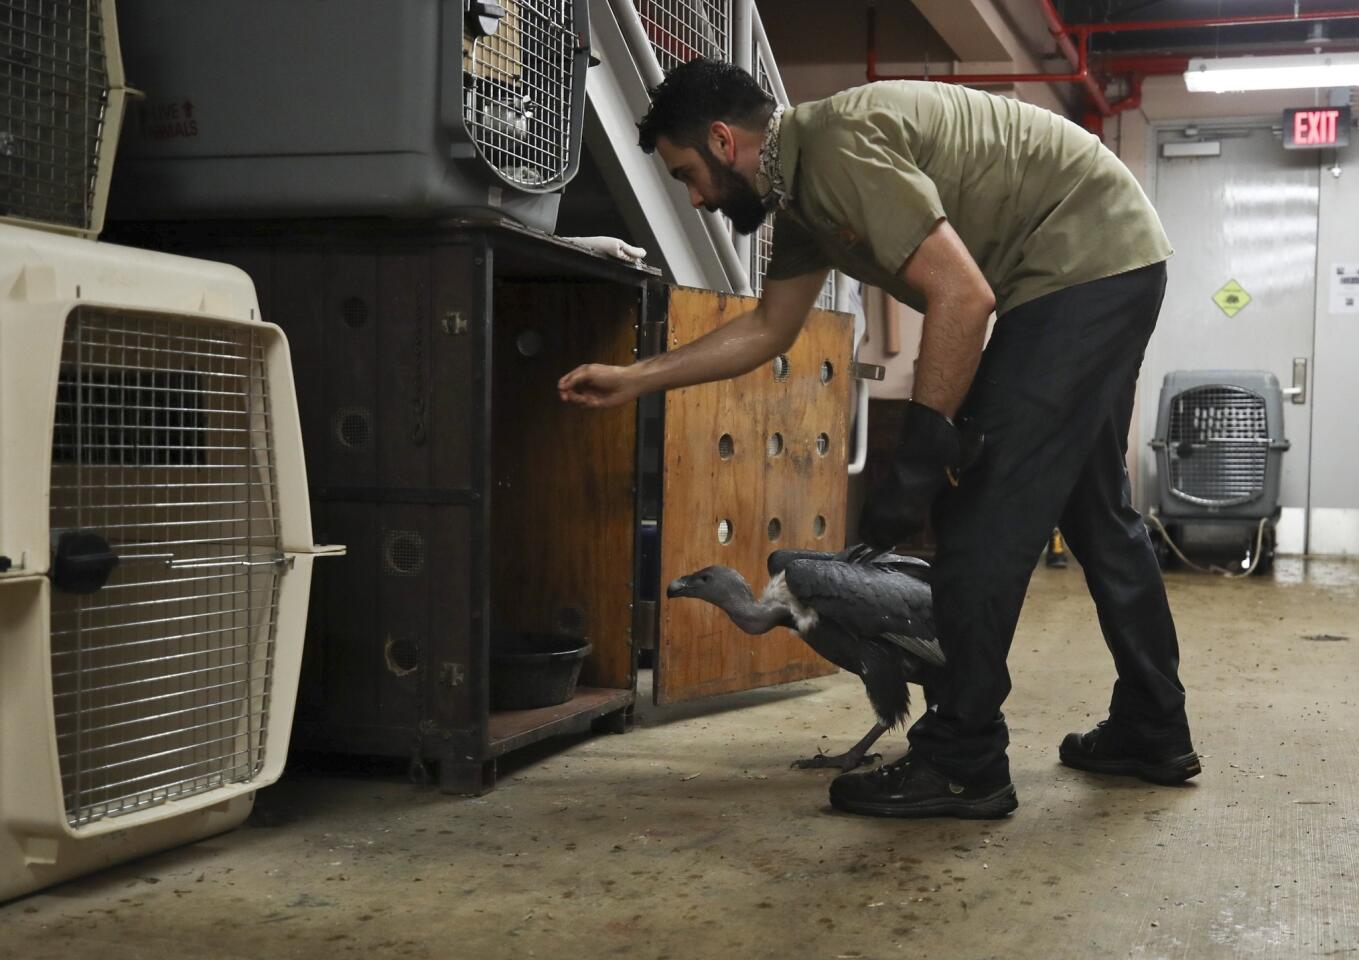 Zookeeper Ryan Martinez leads an Indian white-rumped vulture into a crate as animals are moved into a shelter at the Zoo Miami in preparation for Hurricane Irma on Sept. 9, 2017, in Miami.